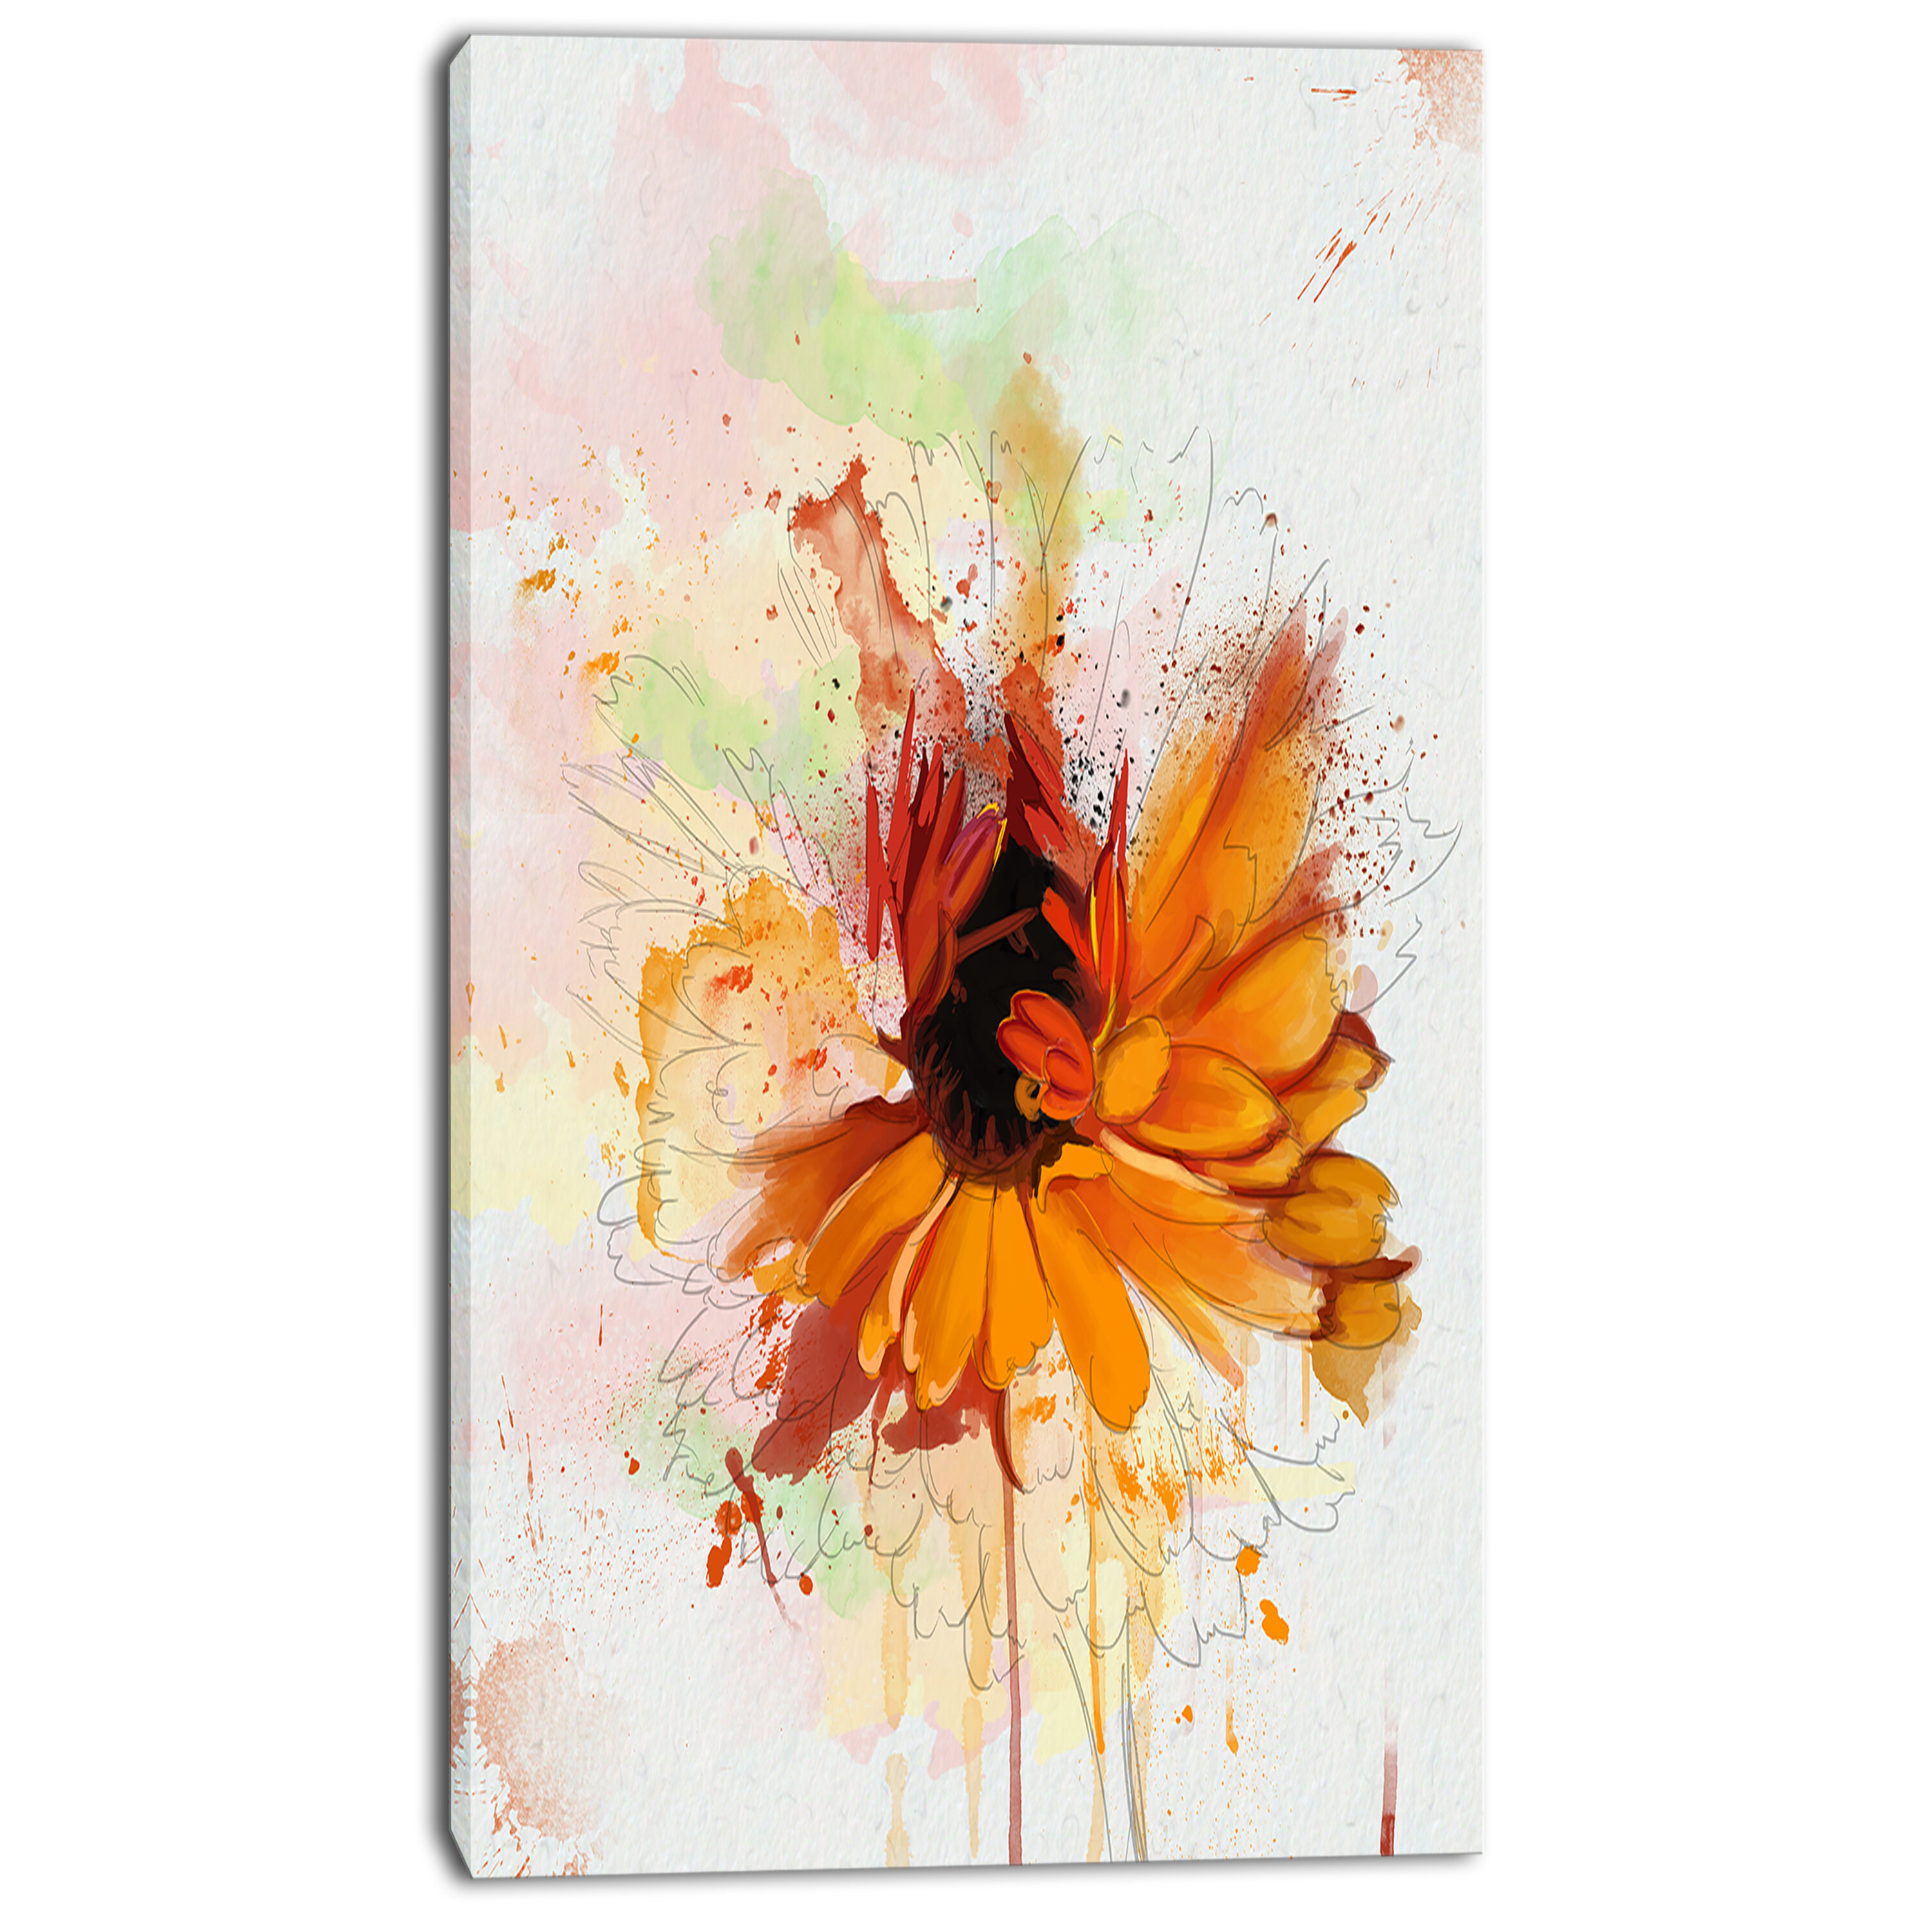 Sunflower Floral SINGLE CANVAS WALL ART Picture Print VA 